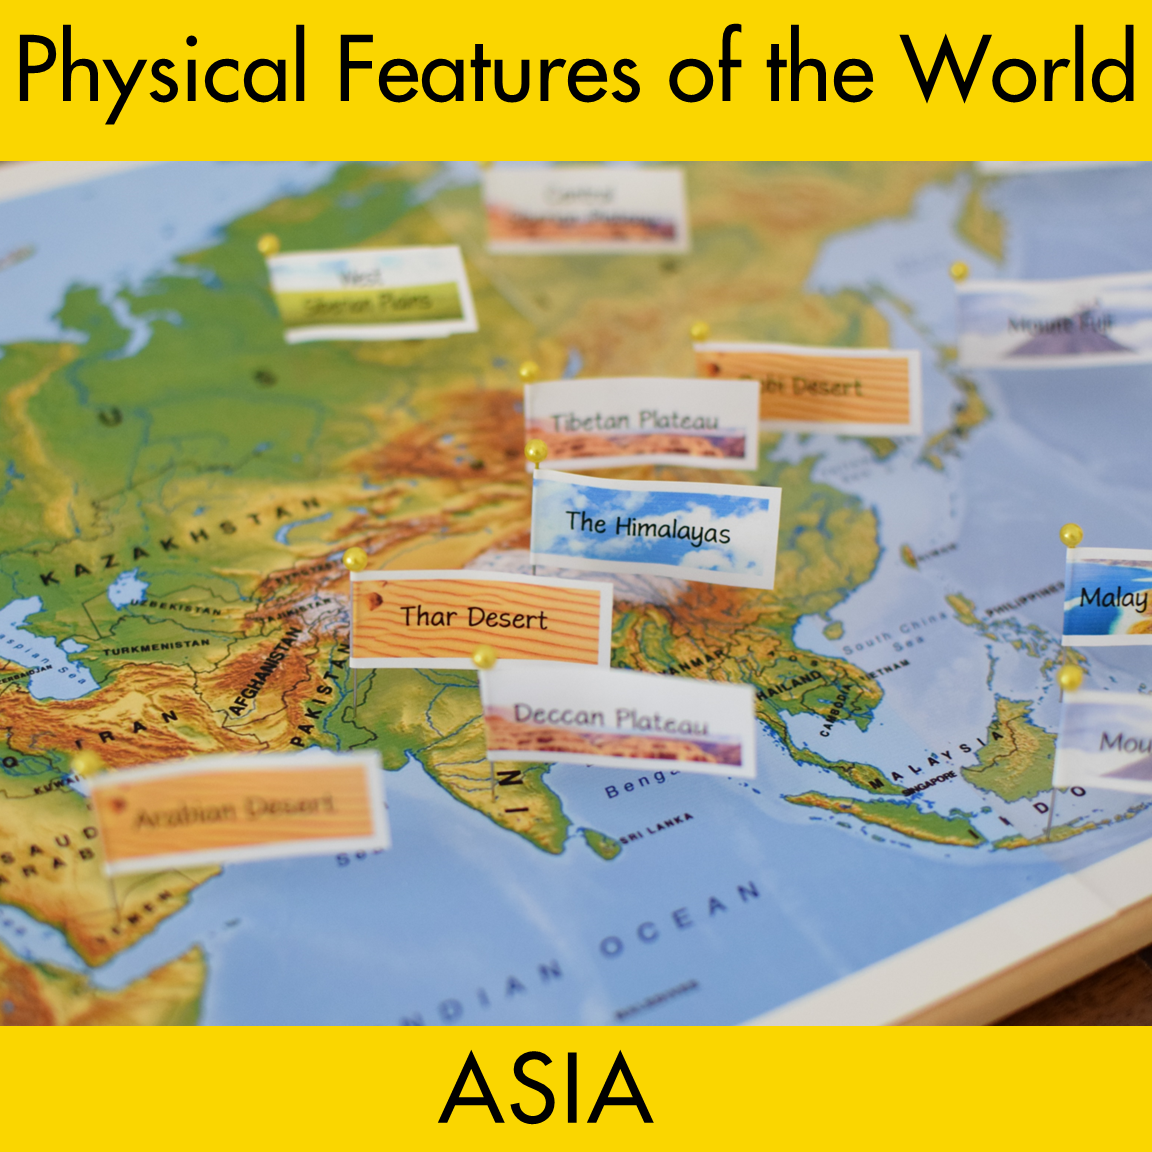 Physical Features of Asia